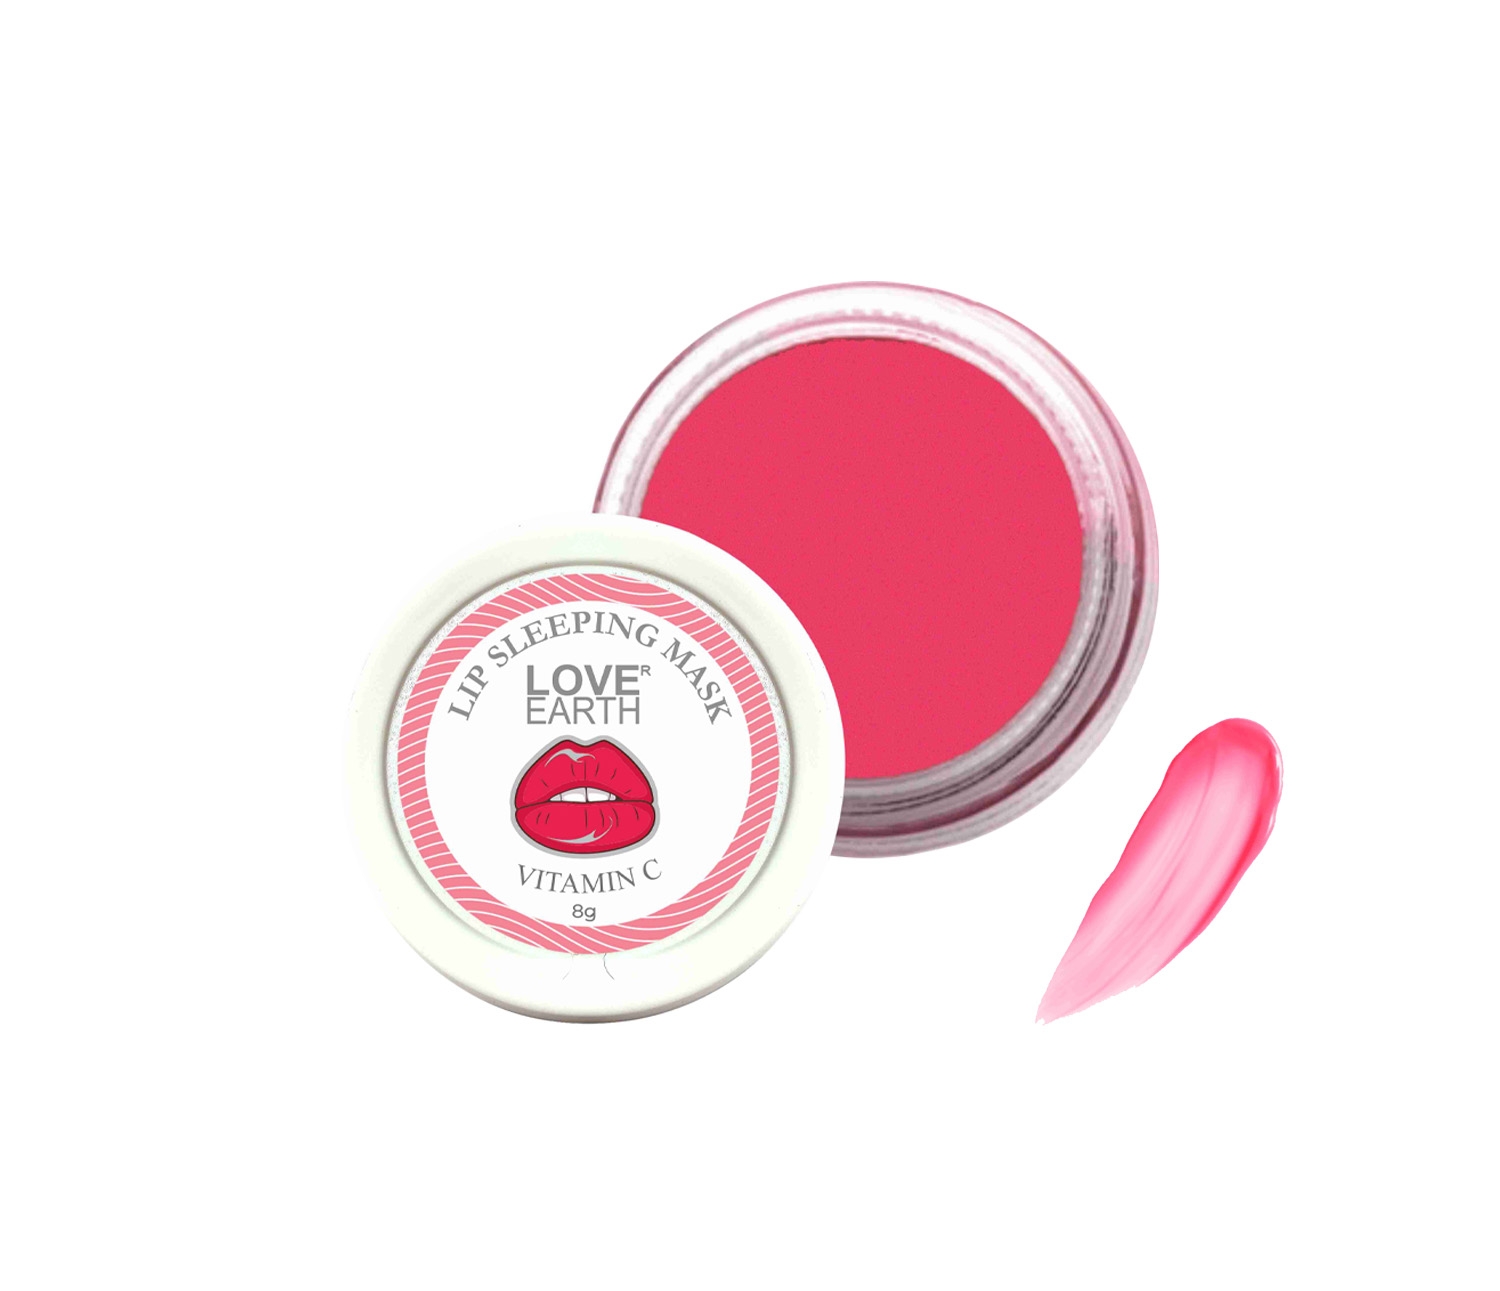 LOVE EARTH | Love Earth Lip Sleeping Mask with Vitamin C & E & Jojoba Oil For Lips Moisturization get Softer, Smoother and Plumper Lips